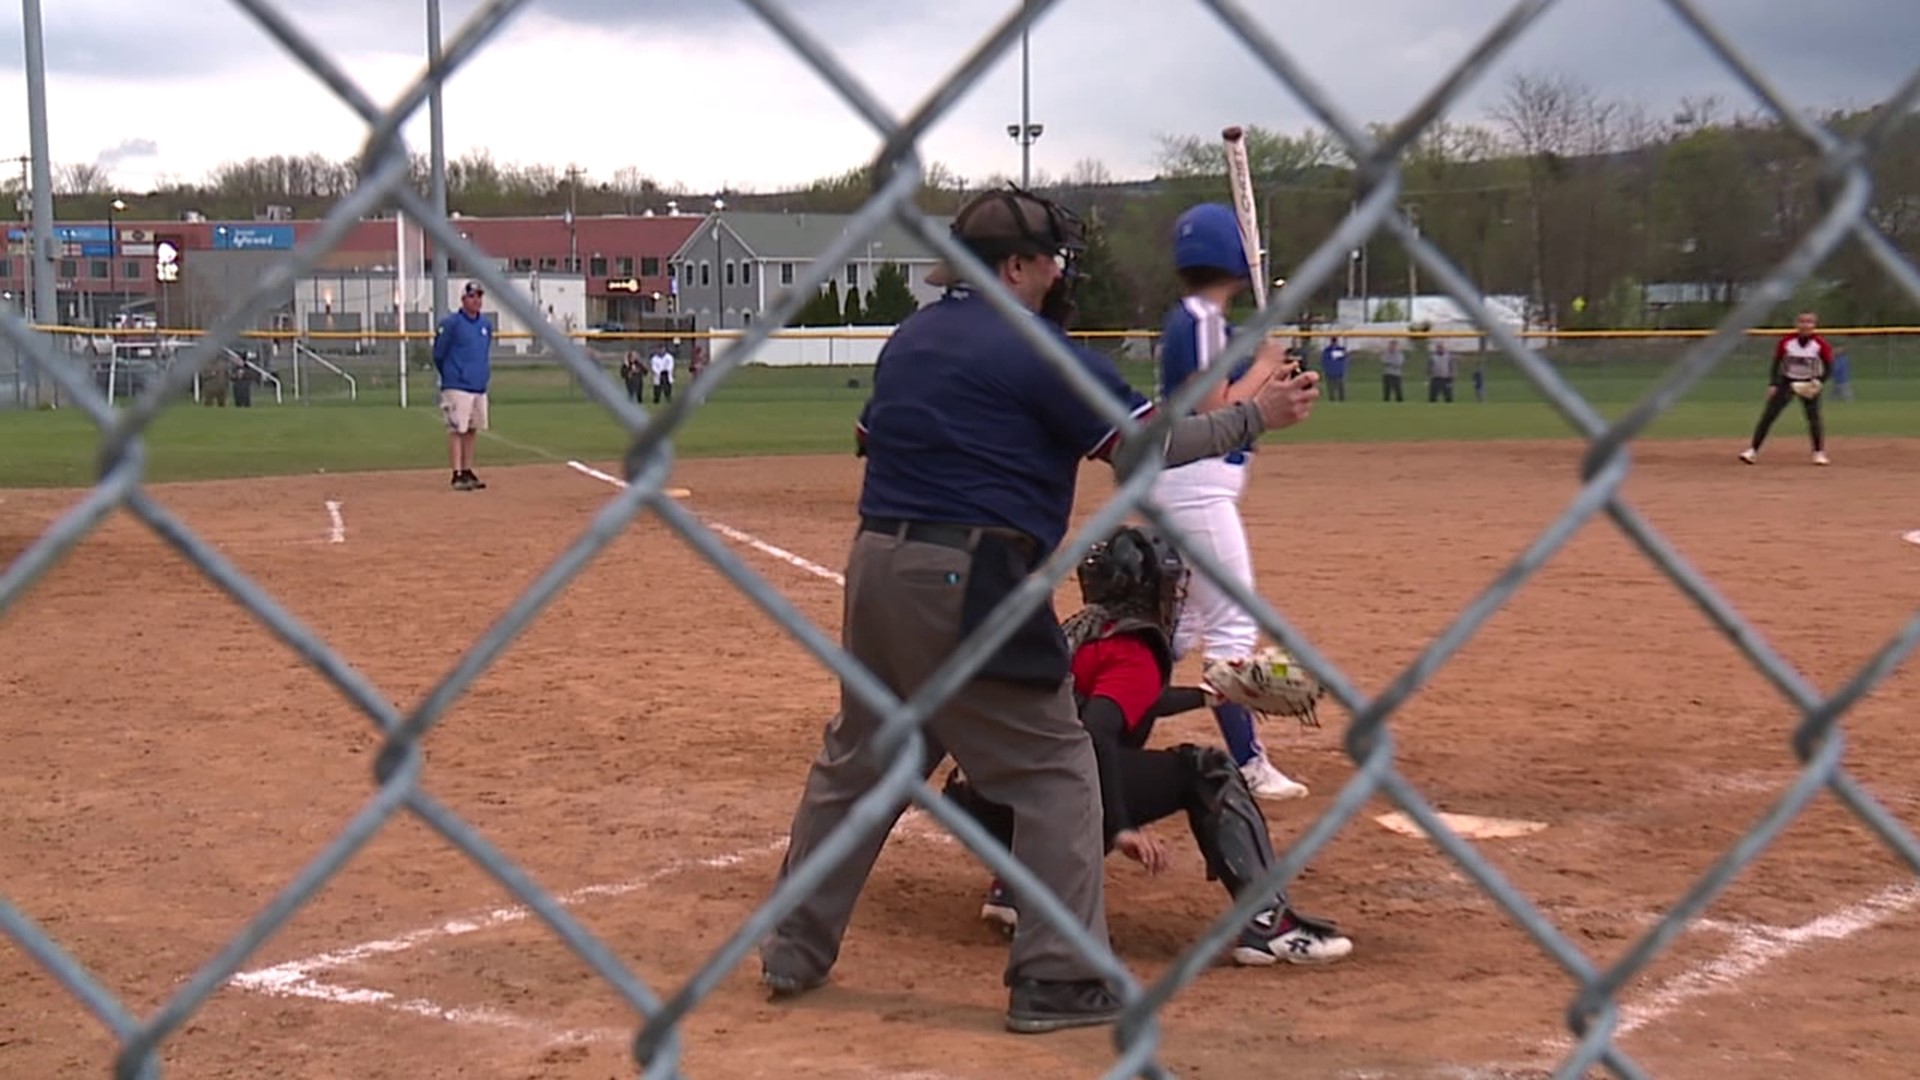 The shortage was apparent at games throughout Lackawanna County on Monday. All the games on the schedule only had one umpire and some had to work double duty.